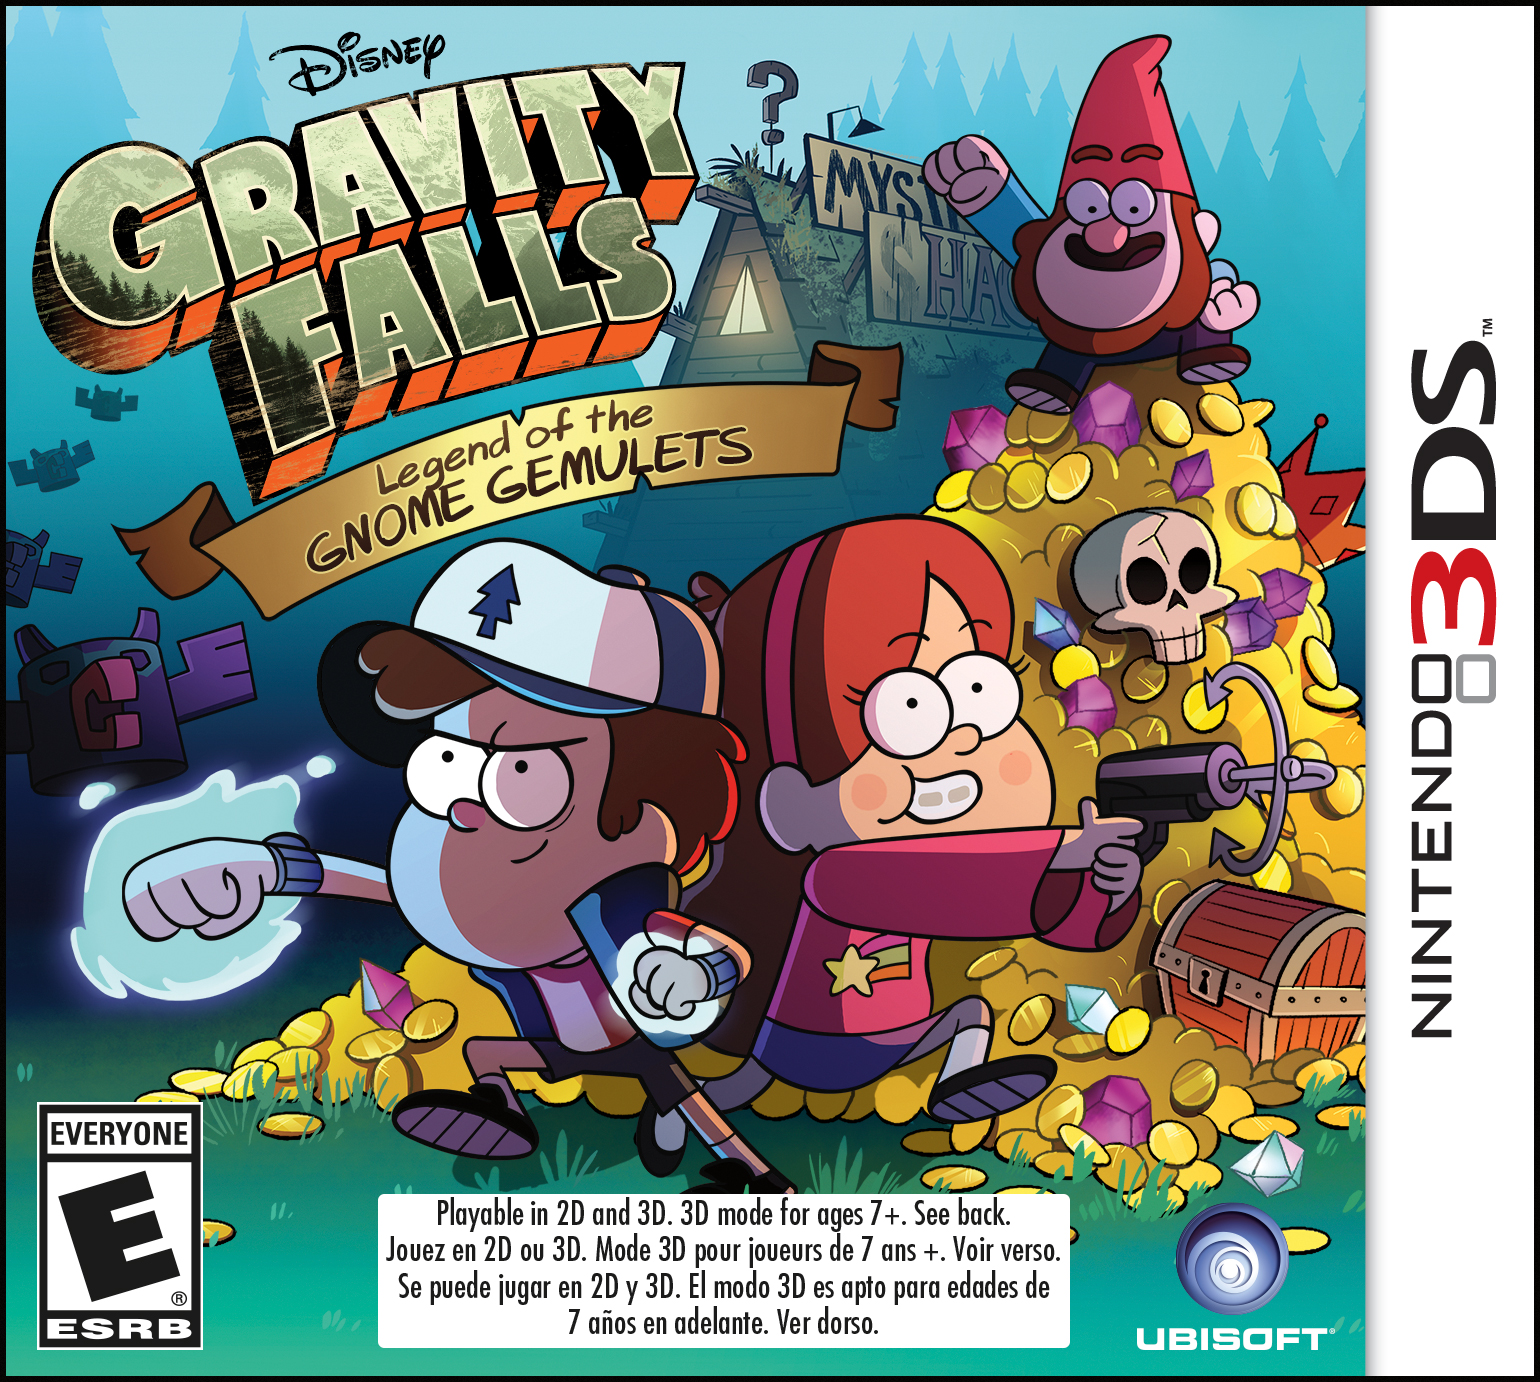 Ubisoft® and Disney Interactive Launch Gravity Falls: Legend of the Gnome Gemulets